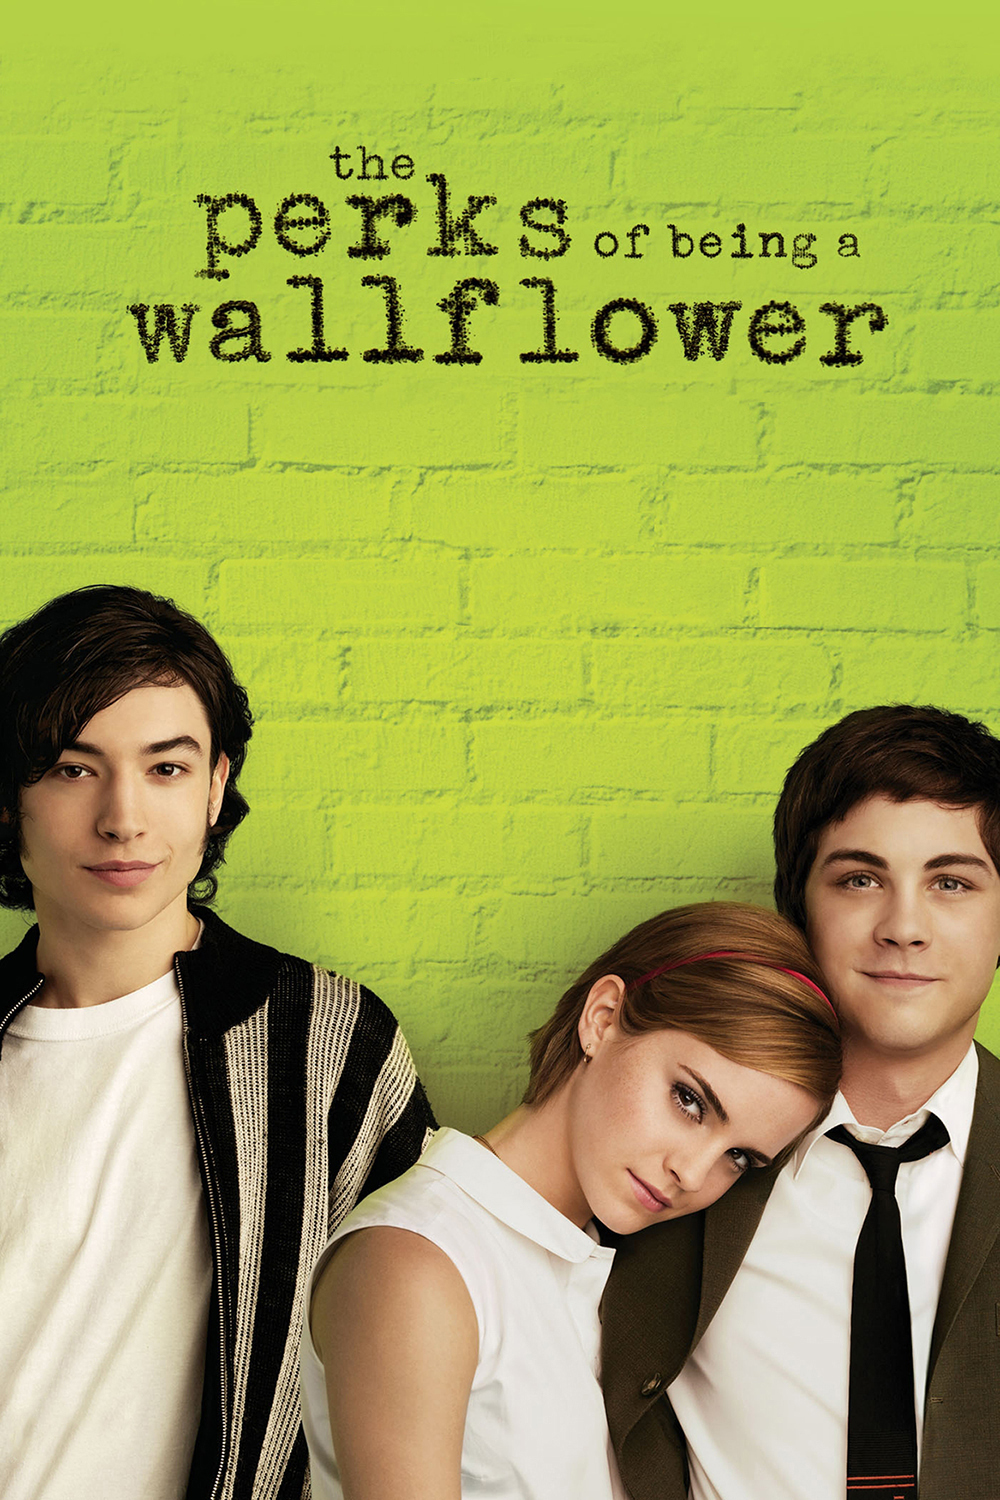 Perks of being a Wallflower